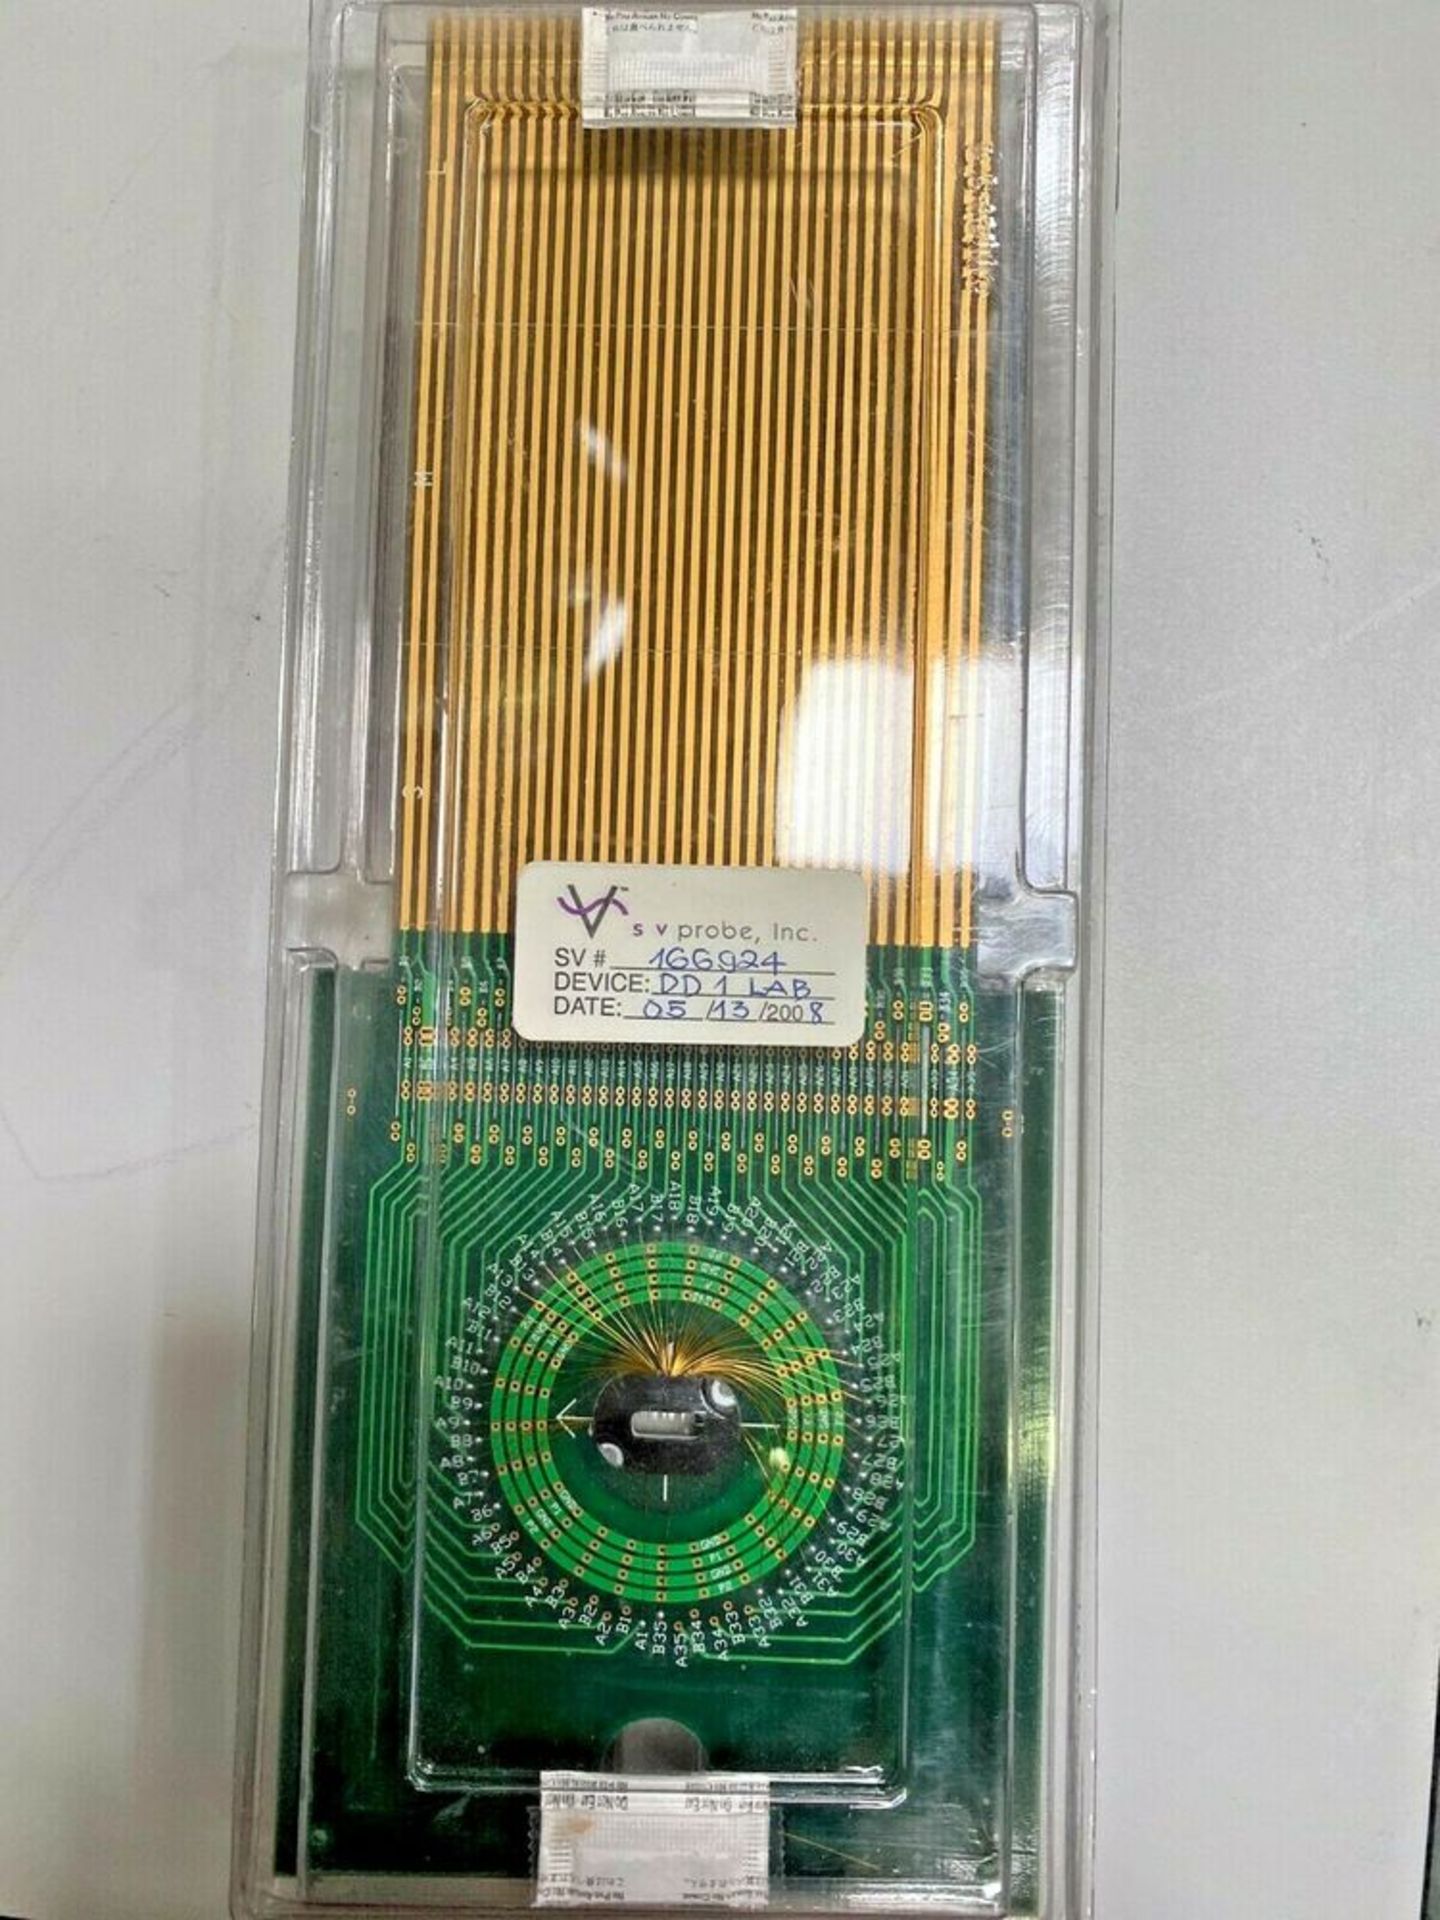 SV Probe Card PCB-0125-01 - Nidec S V TCL Semiconductor Test Board - Image 2 of 3